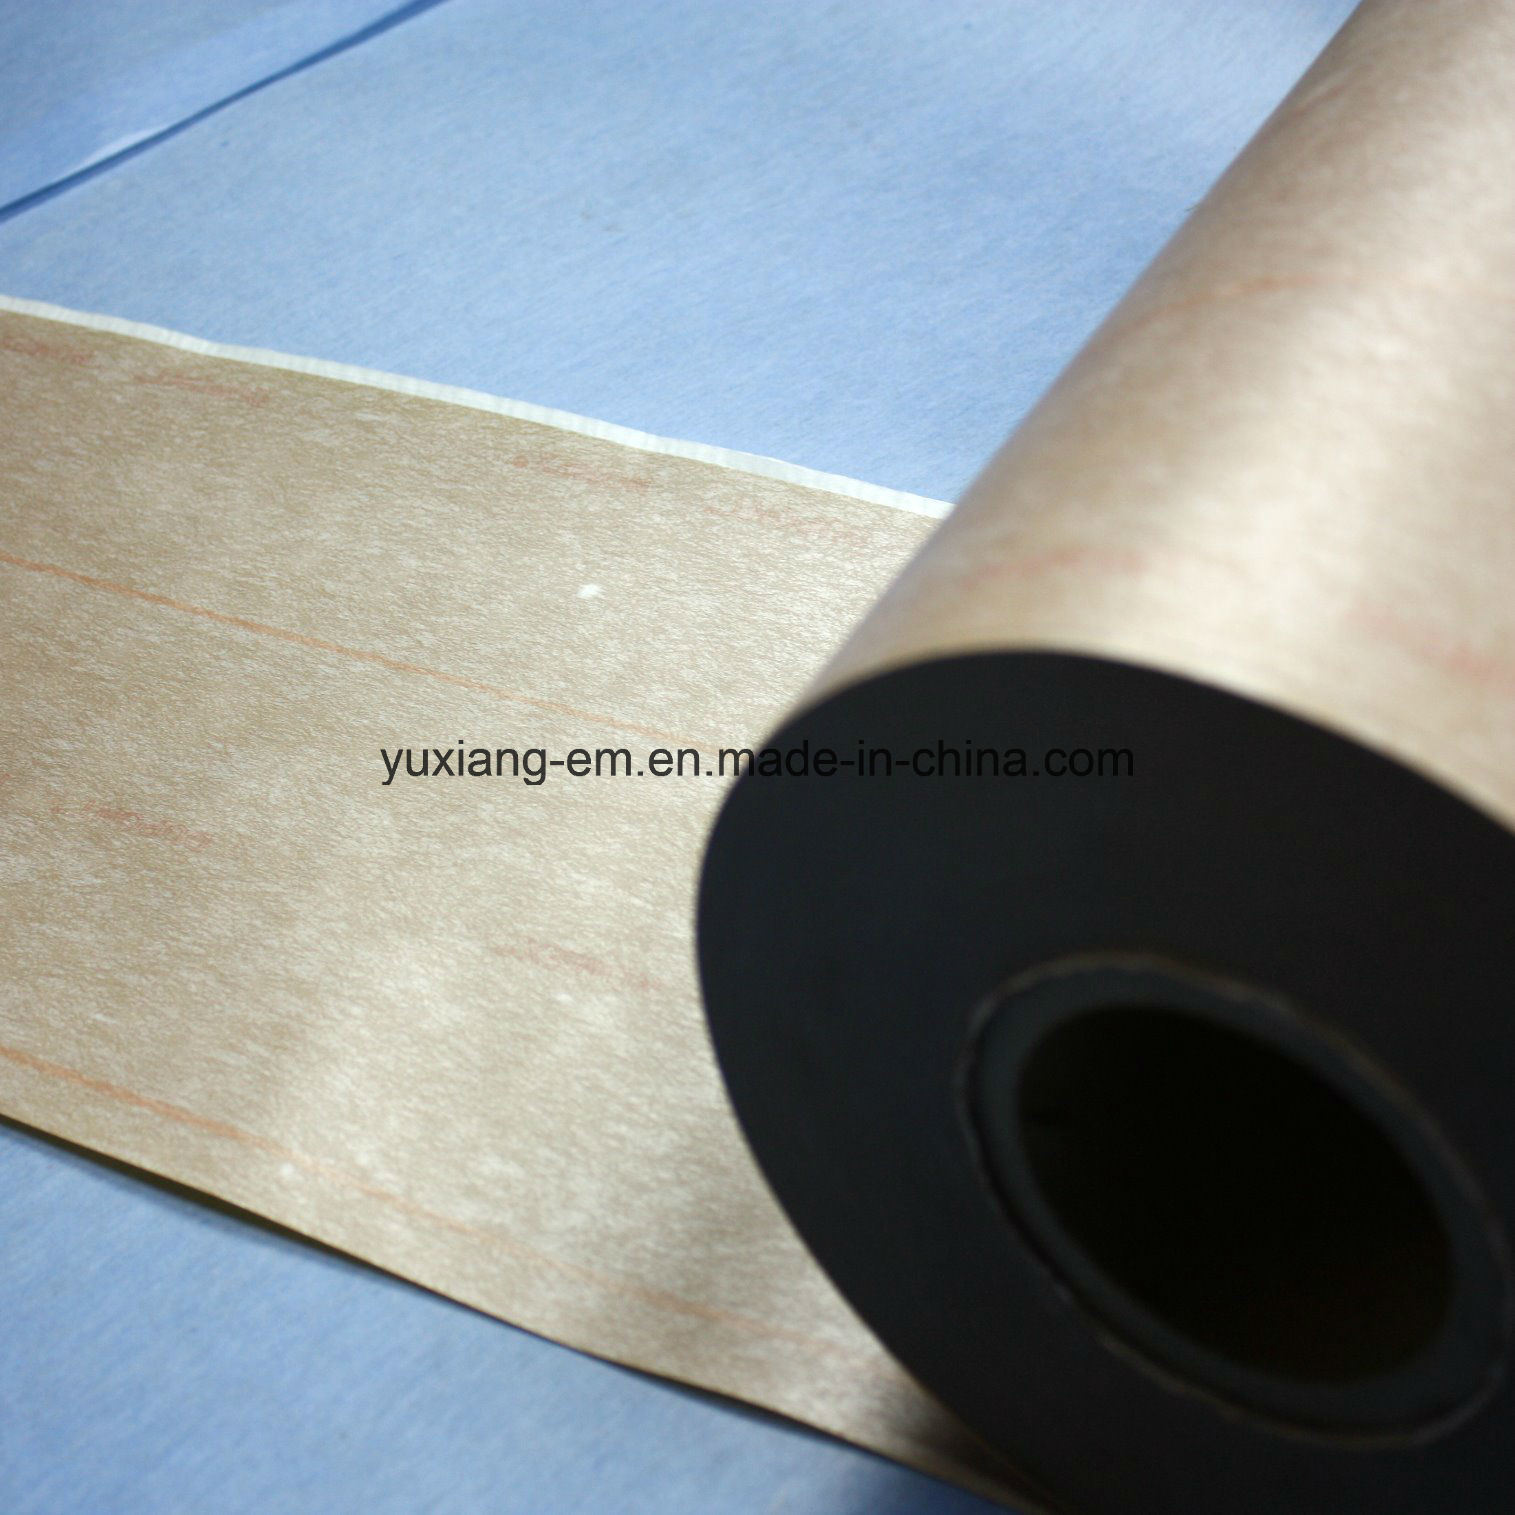 Hot Sale Electrical Material Electrical Insulating Paper Nhn (H CLASS)